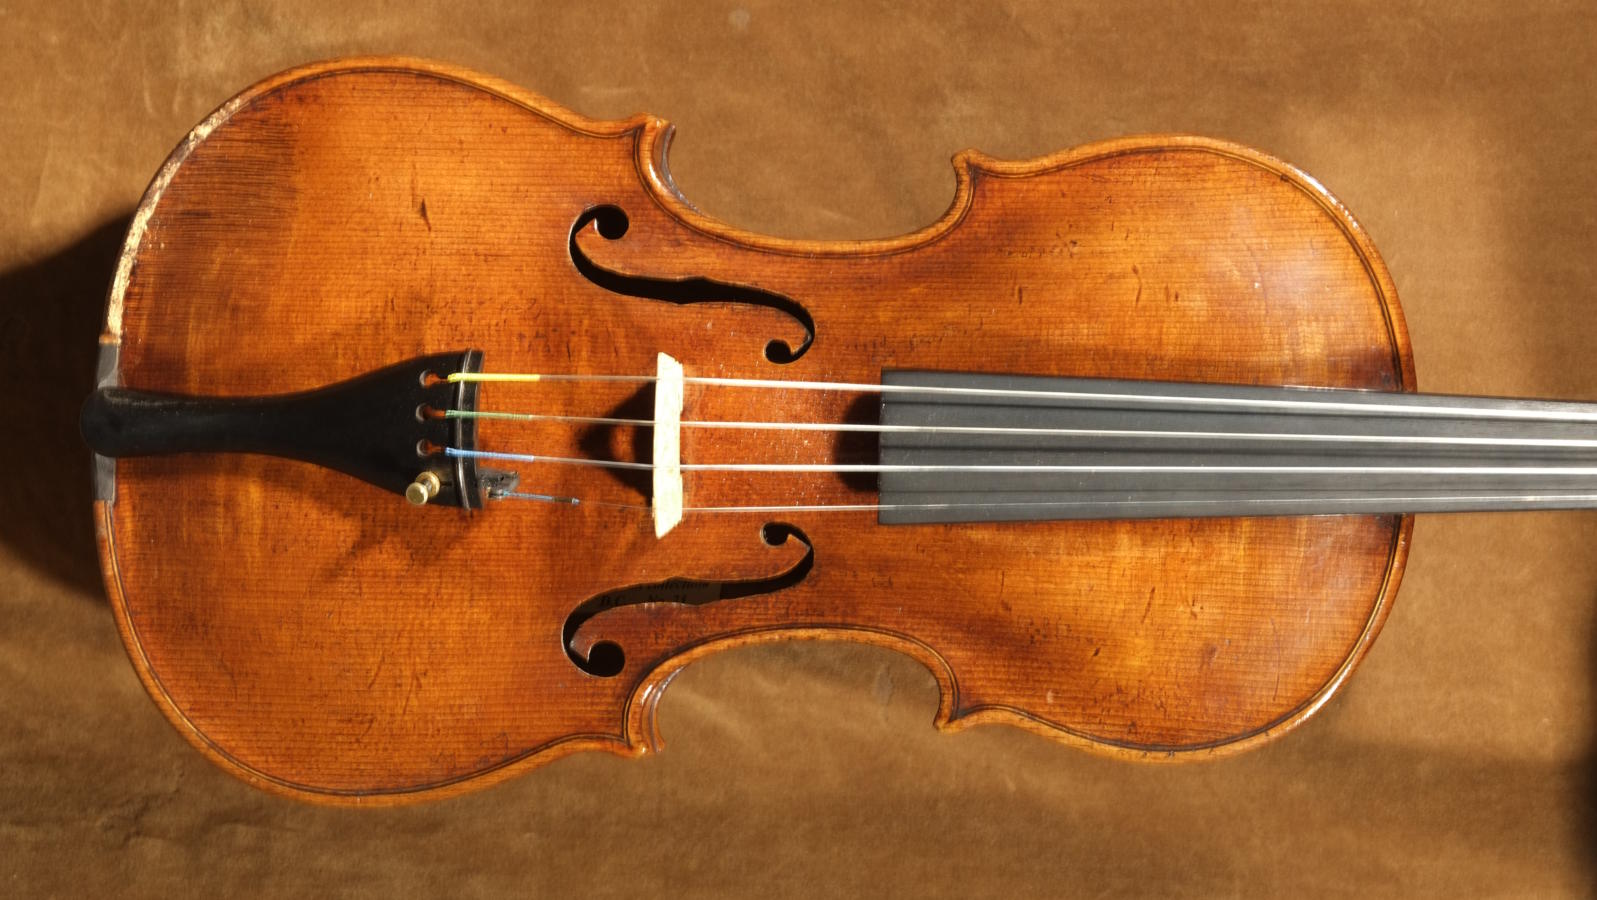 Violins Of Hope: A Unique Jewish Story In A Musical Place My Jewish Learning